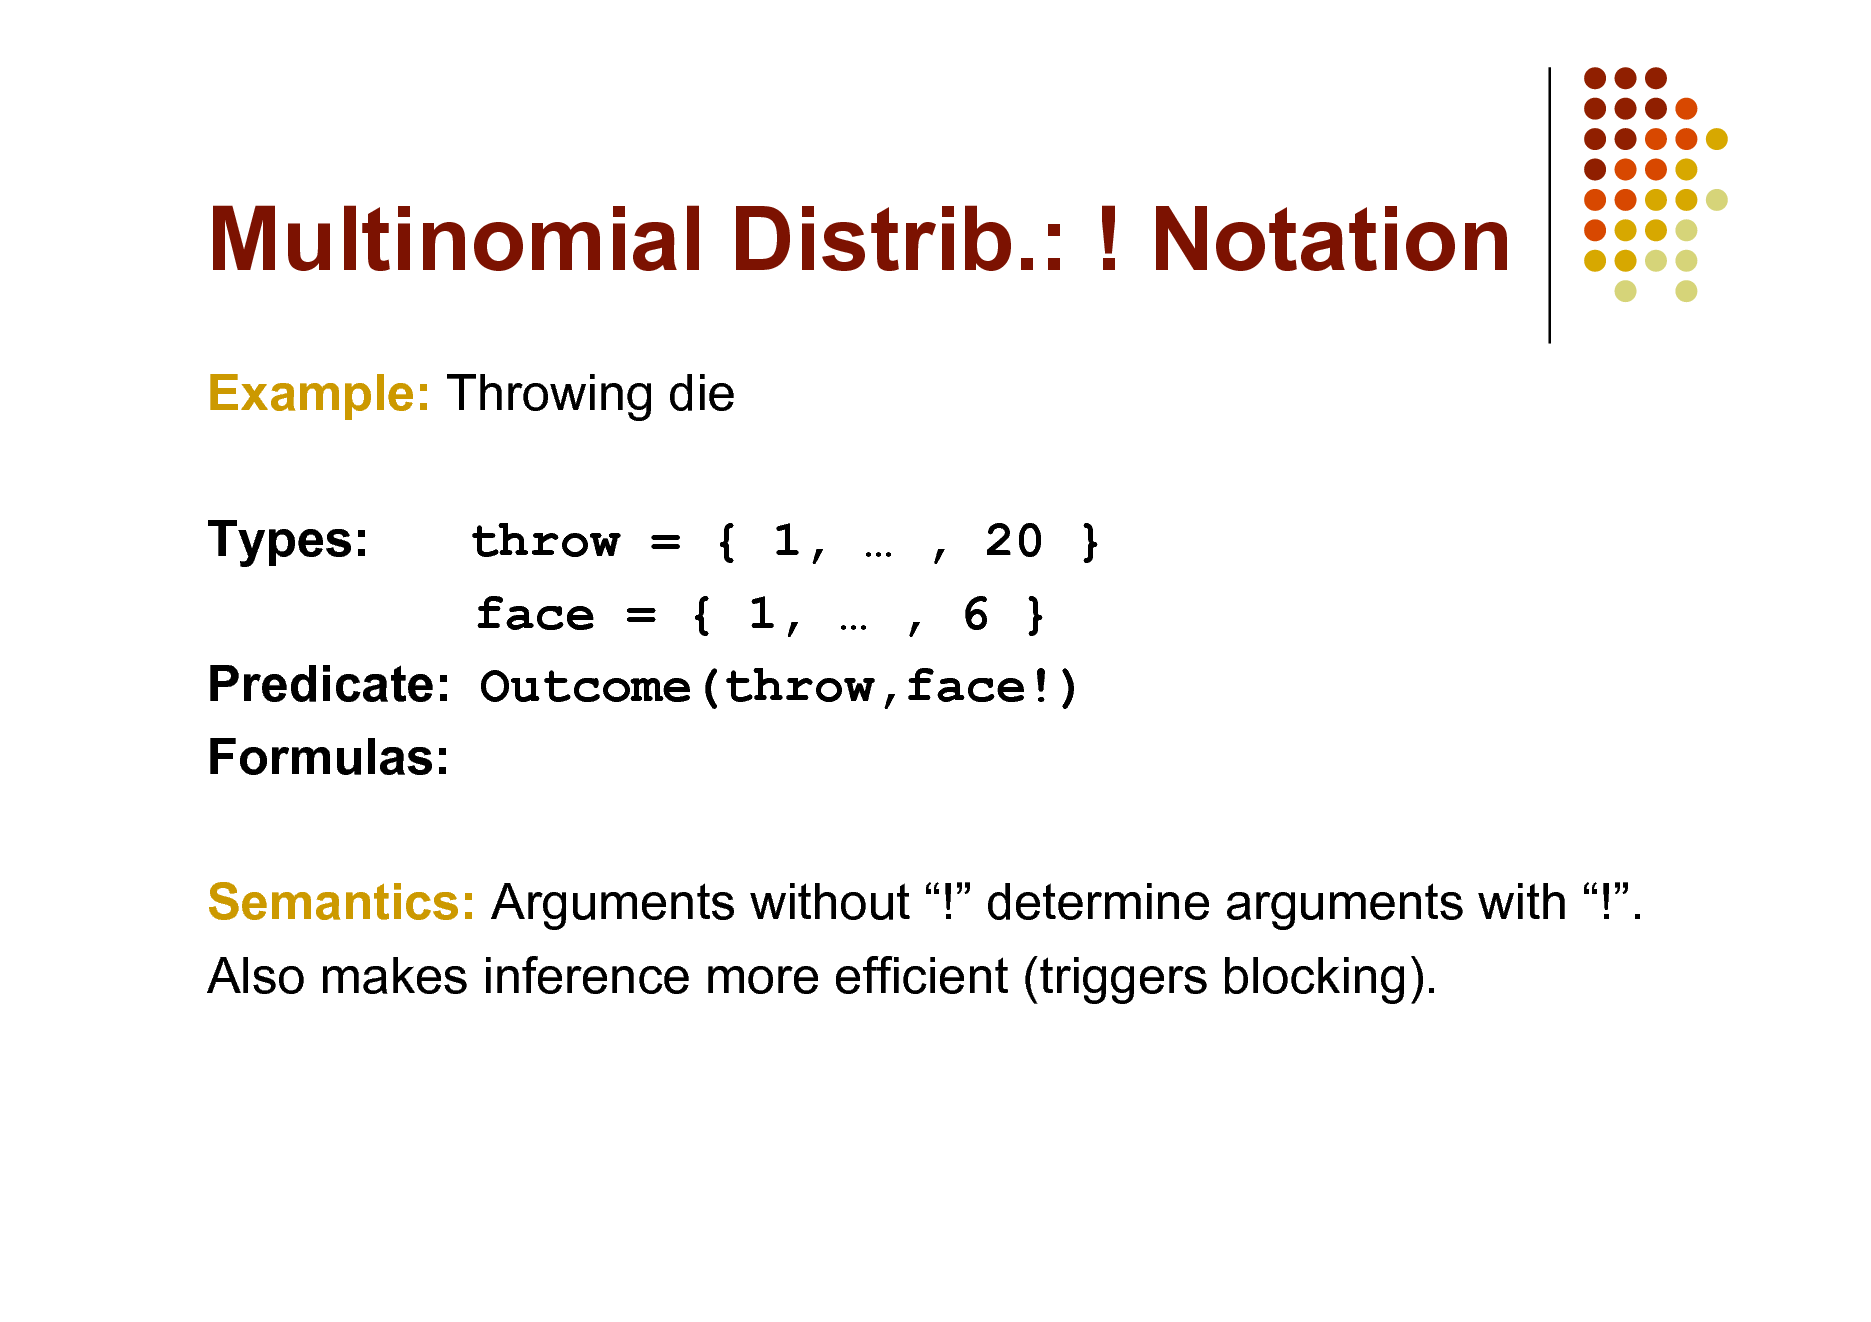 Slide: Multinomial Distrib.: ! Notation
Example: Throwing die Types: throw = { 1,  , 20 } face = { 1,  , 6 } Predicate: Outcome(throw,face!) Formulas: Semantics: Arguments without ! determine arguments with !. Also makes inference more efficient (triggers blocking).

